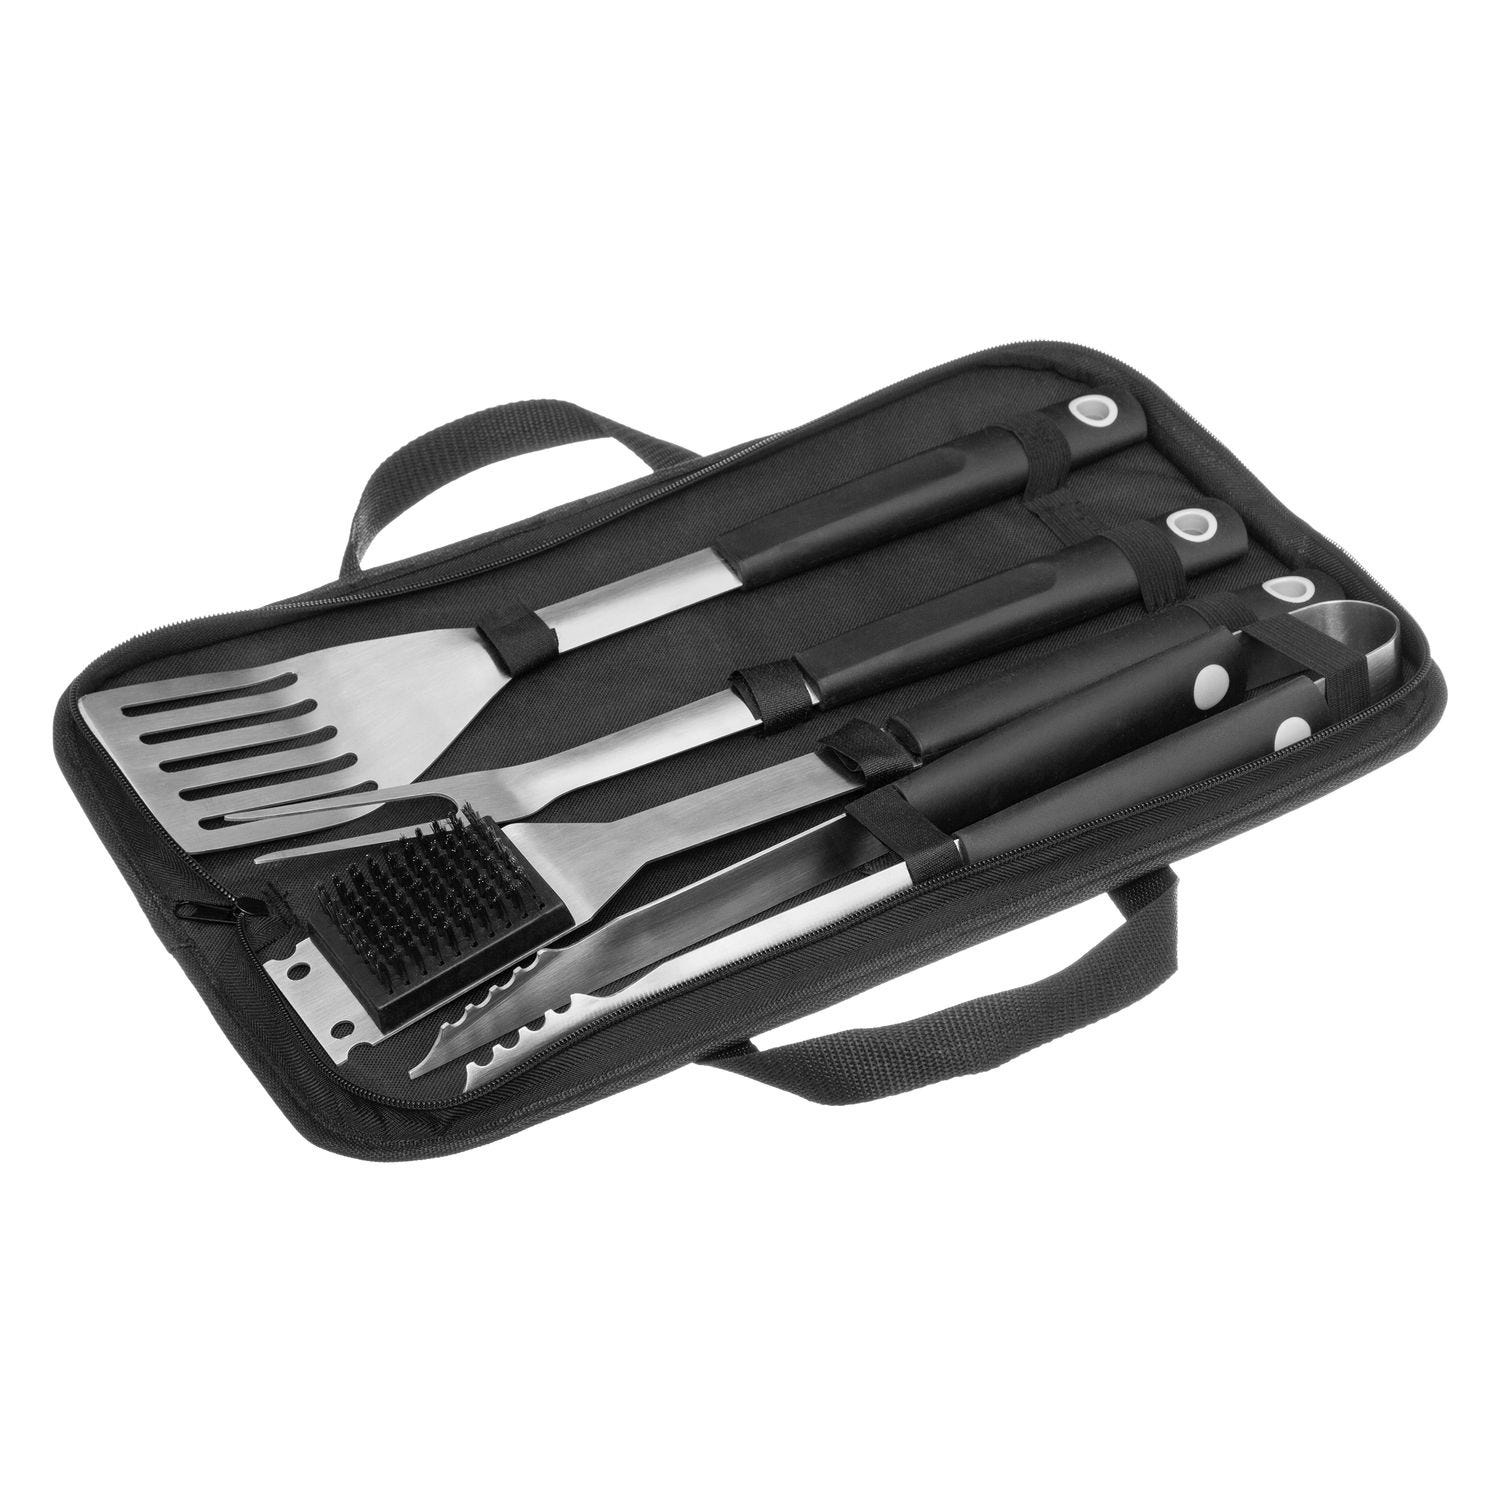 BBQ Grill Accessoires Outils Set, Kit Ustensiles De Barbecue, Kit